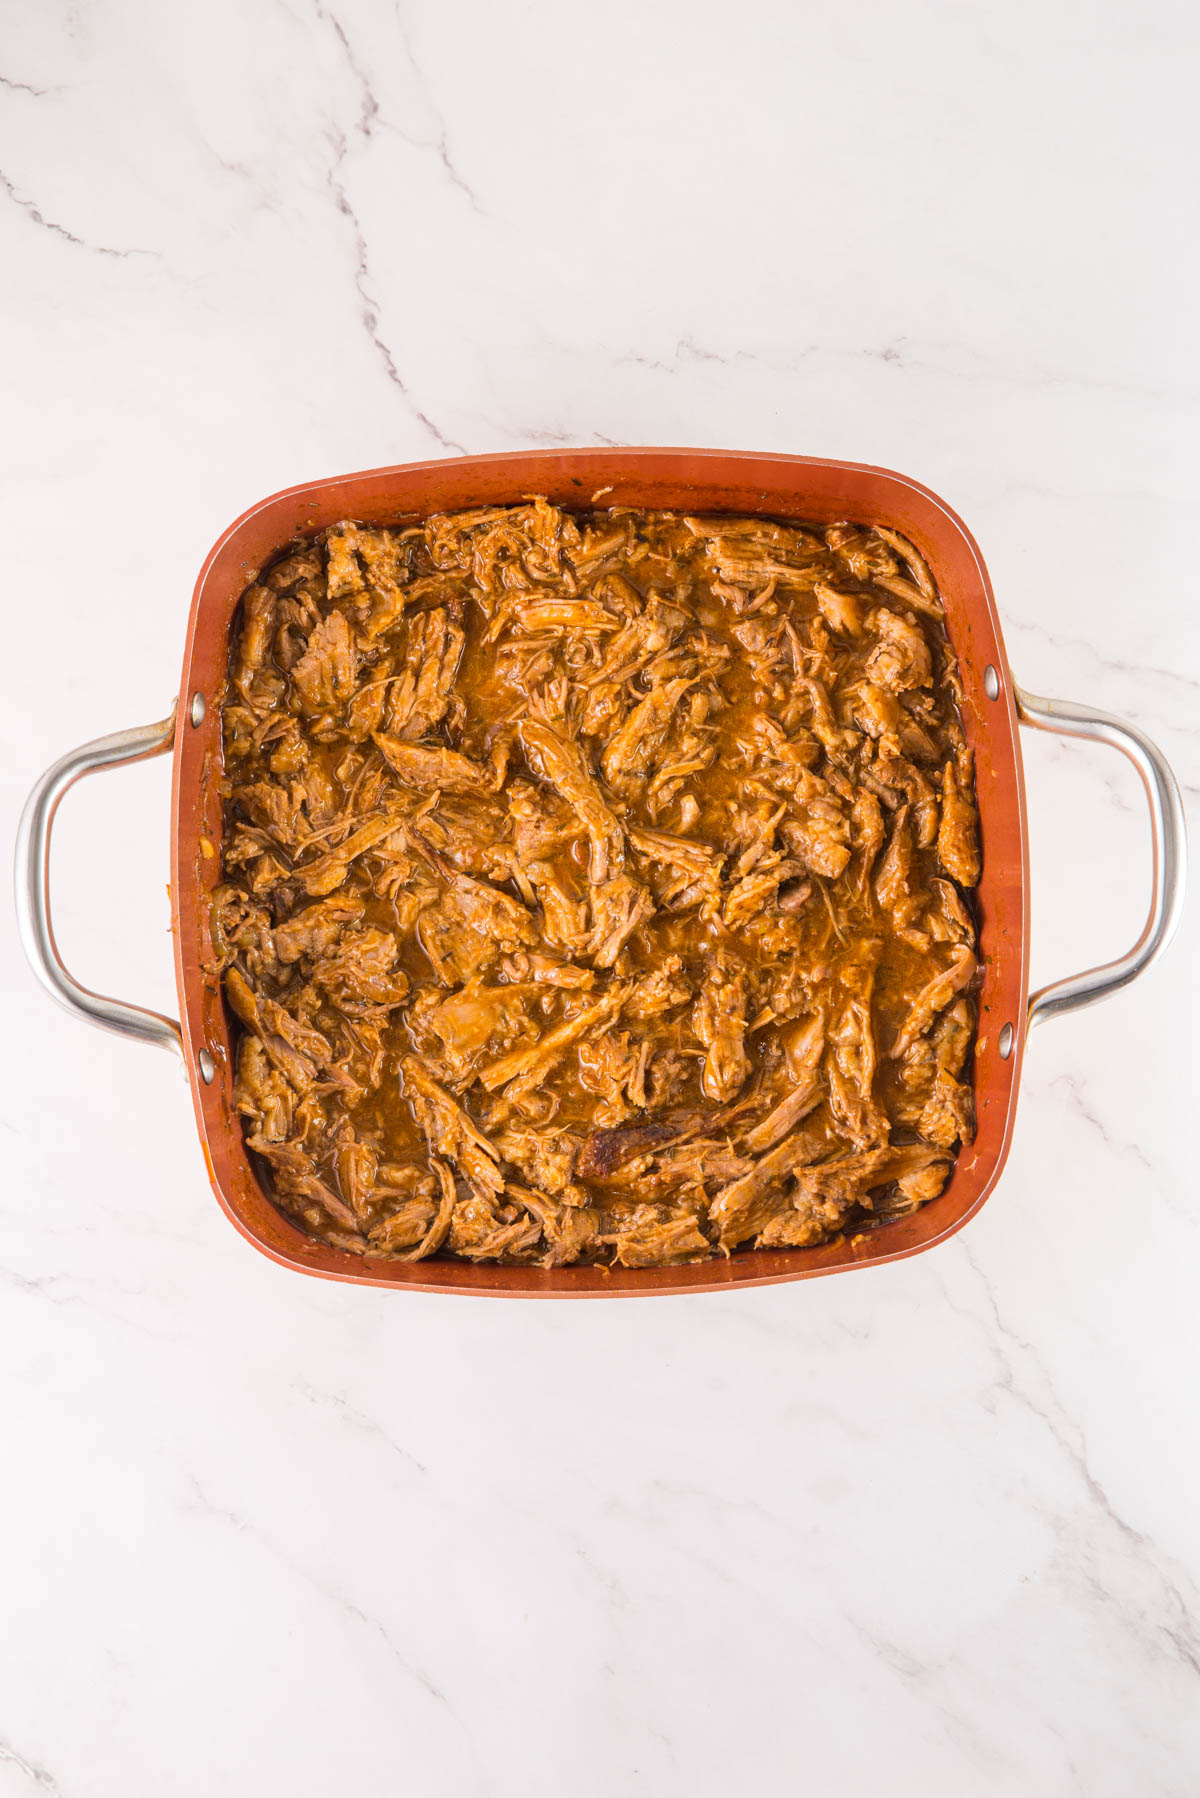 Pulled pork in a red baking dish on a marble countertop.